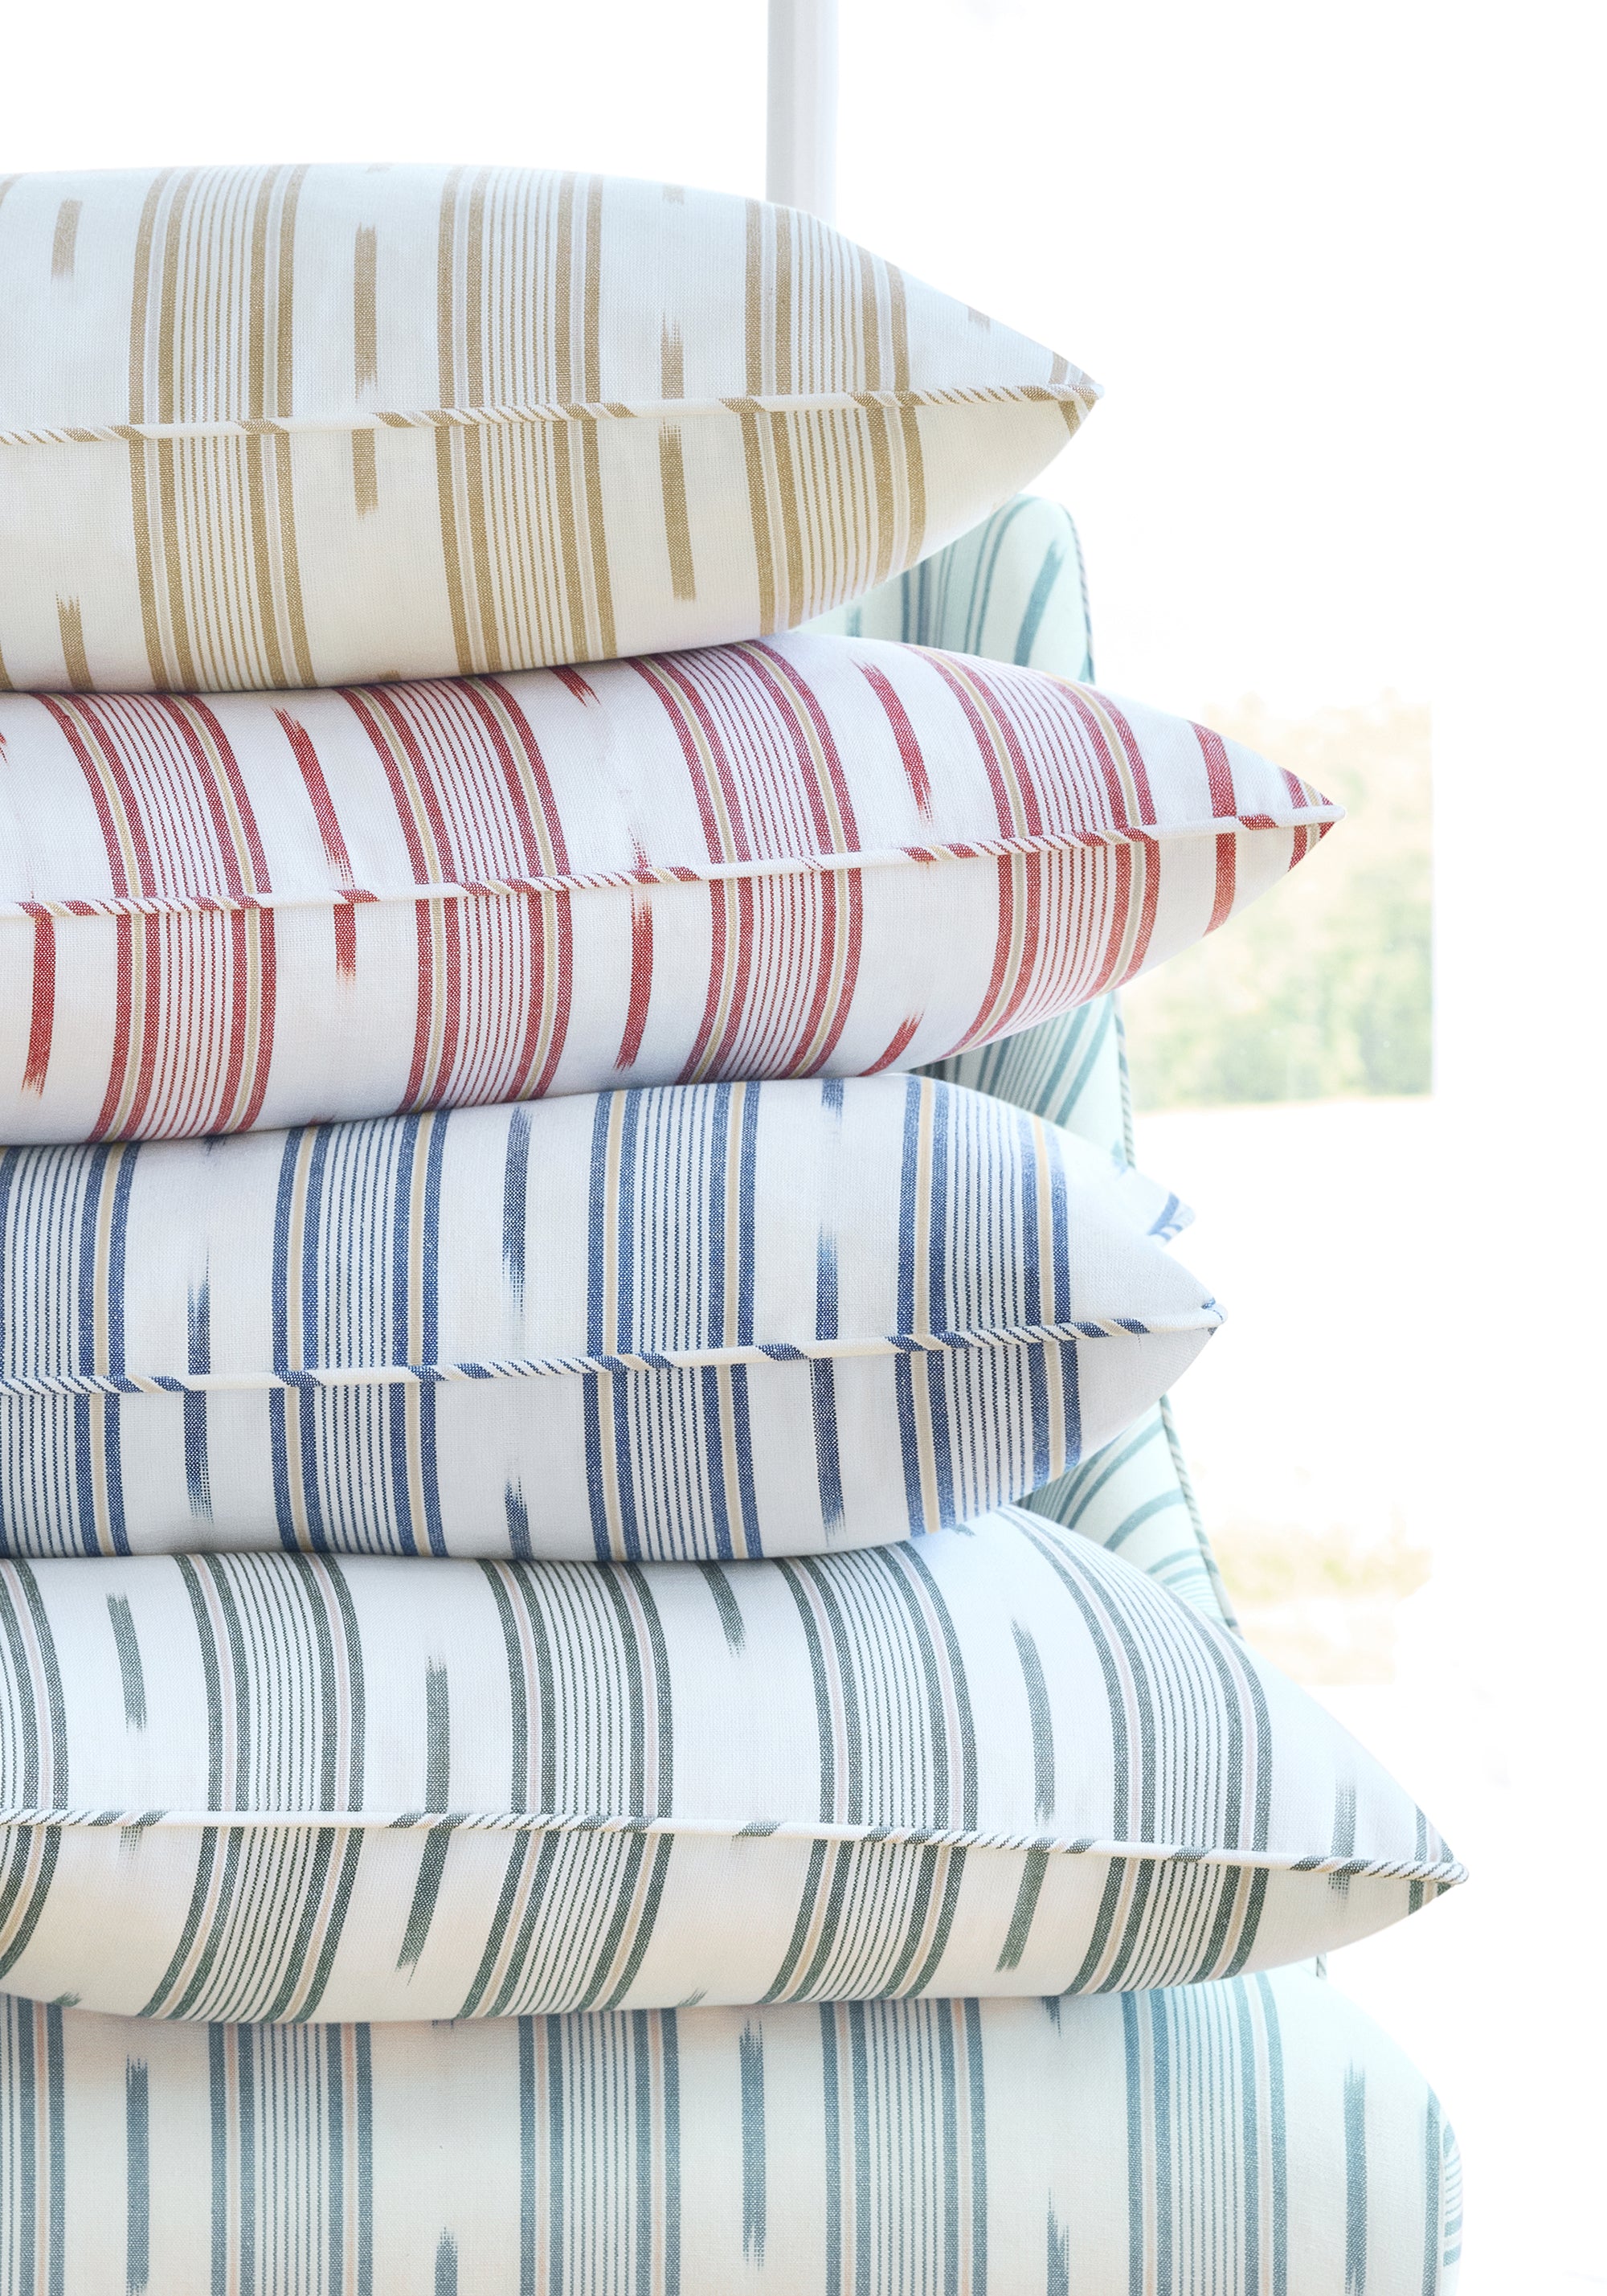 Pillows in Odeshia Stripe fabric in camel color - pattern number W781306 - by Thibaut in the Montecito collection